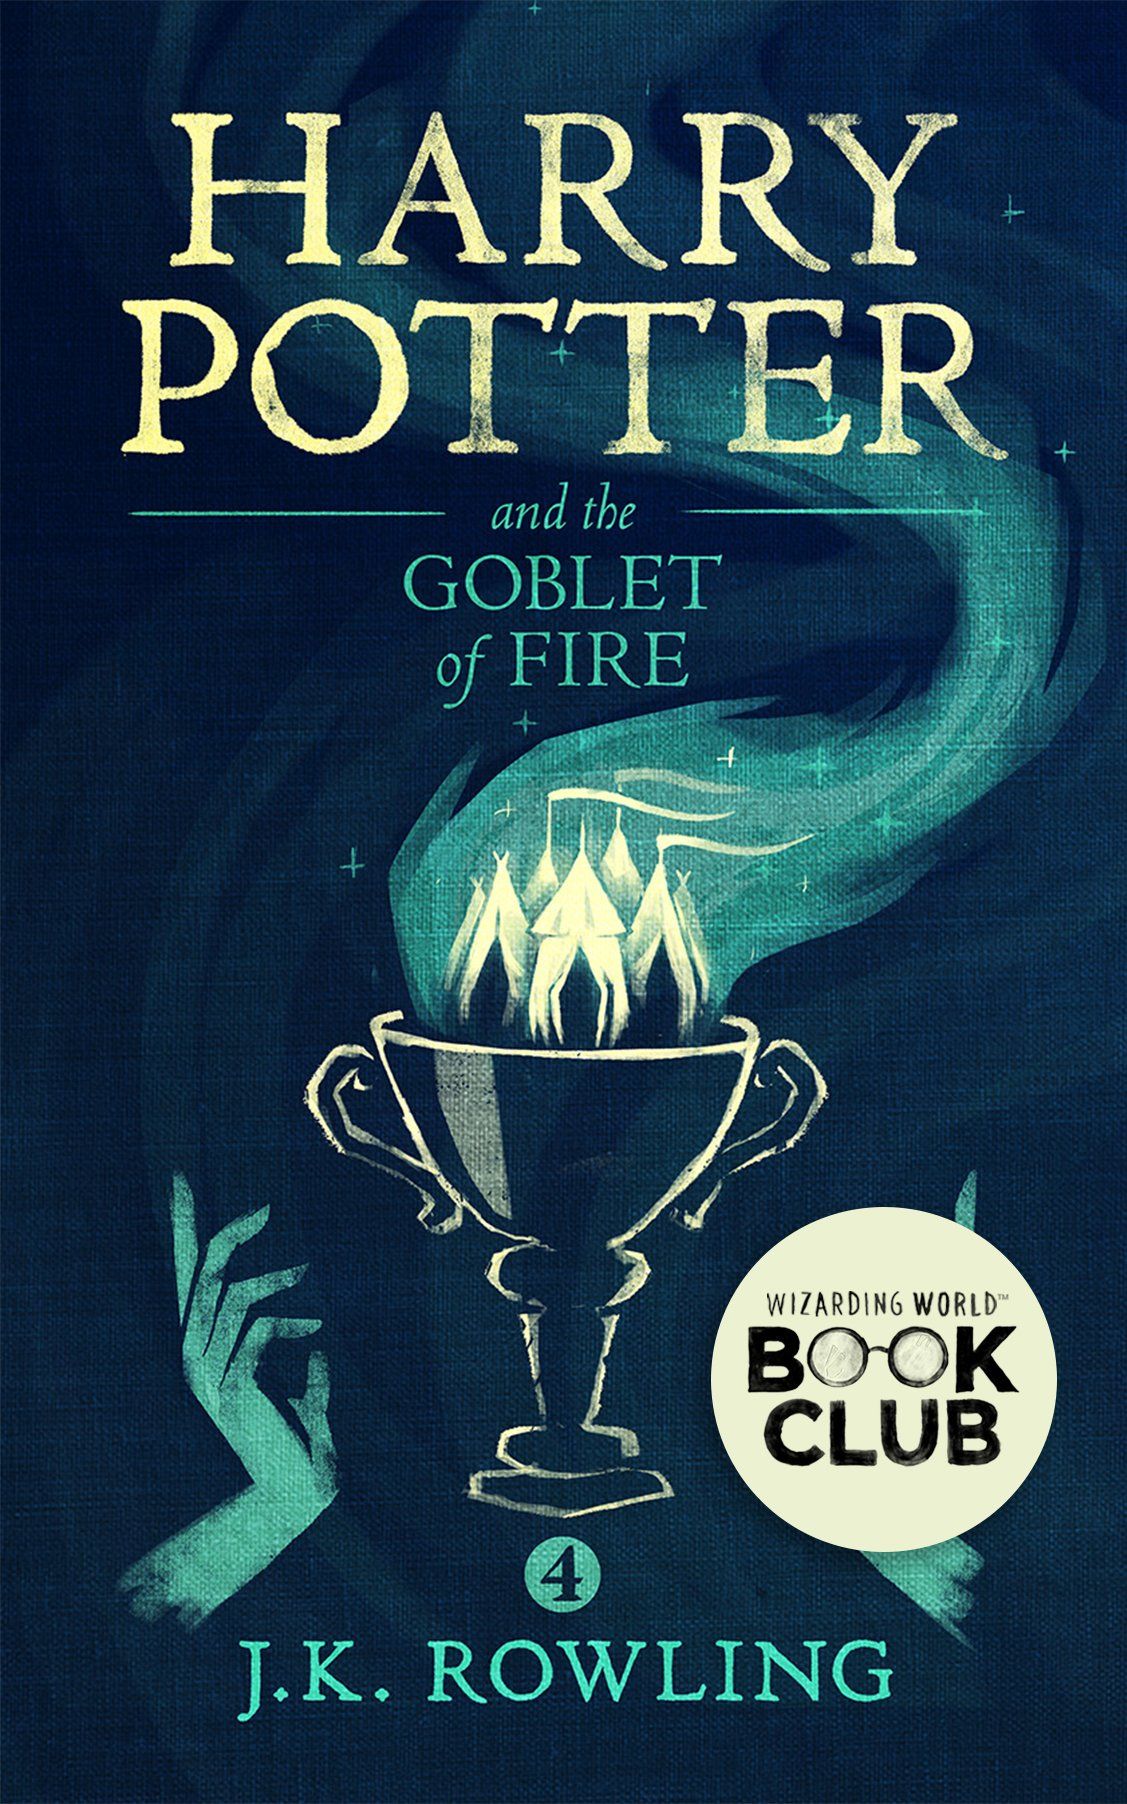 Harry Potter and the Goblet of Fire eBook: Rowling